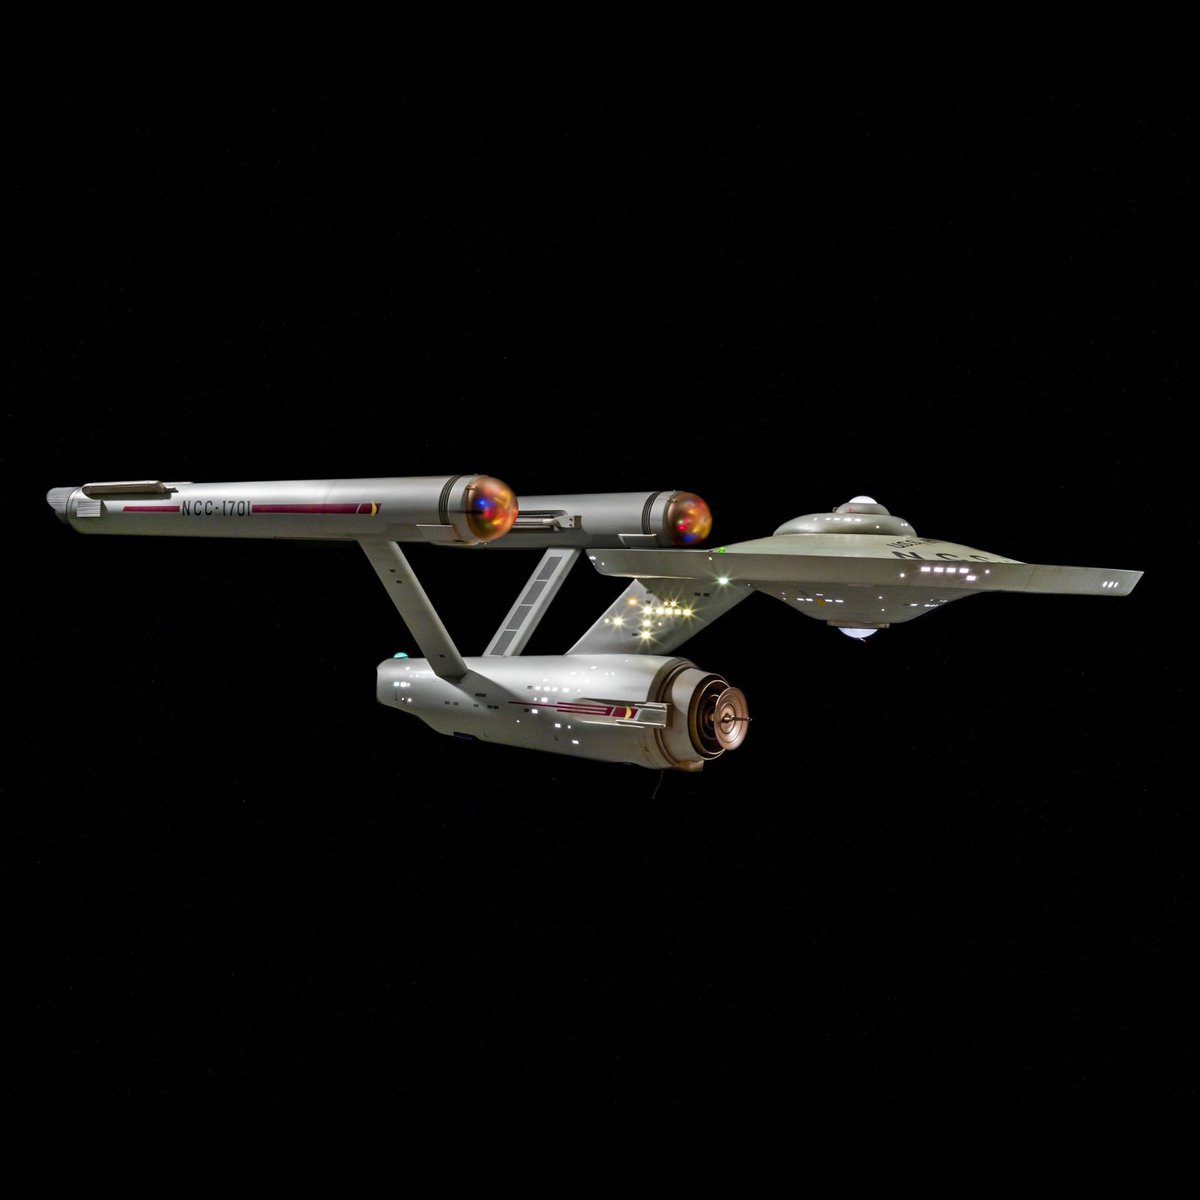 #OTD in 1966 #StarTrek (TOS) debuted on TV screens across the U.S. The original starship Enterprise studio model used in the TV show is in our collection: s.si.edu/3AYPnVD #StarTrekDay #AirSpacePhoto